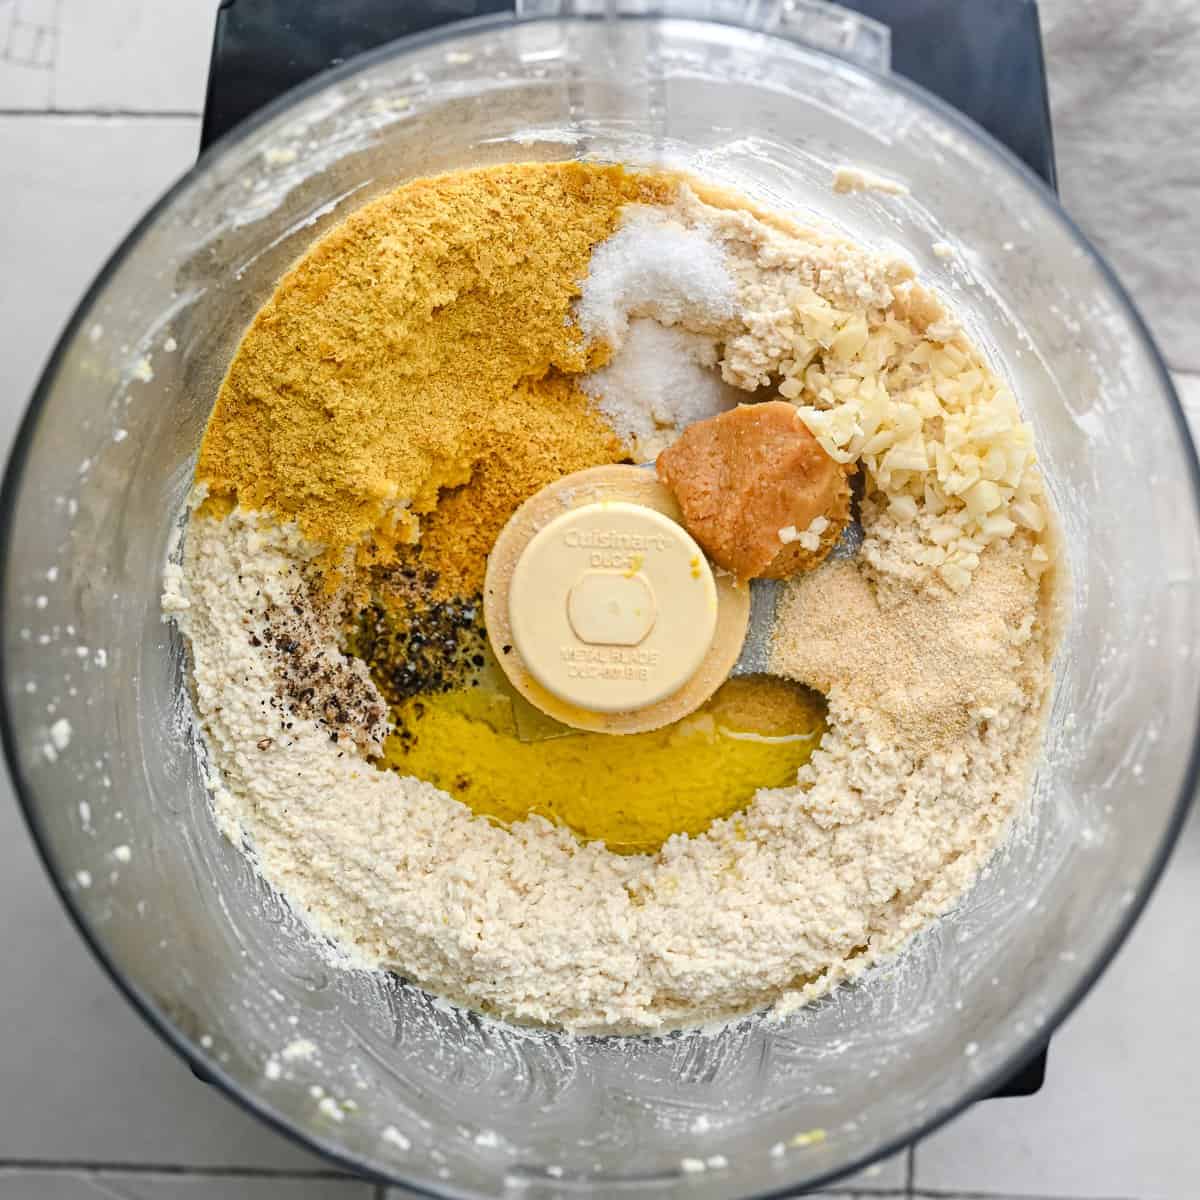 blended vegan ricotta made of cashews in food processor bowl with nutritional yeast, seasonings, and olive oil